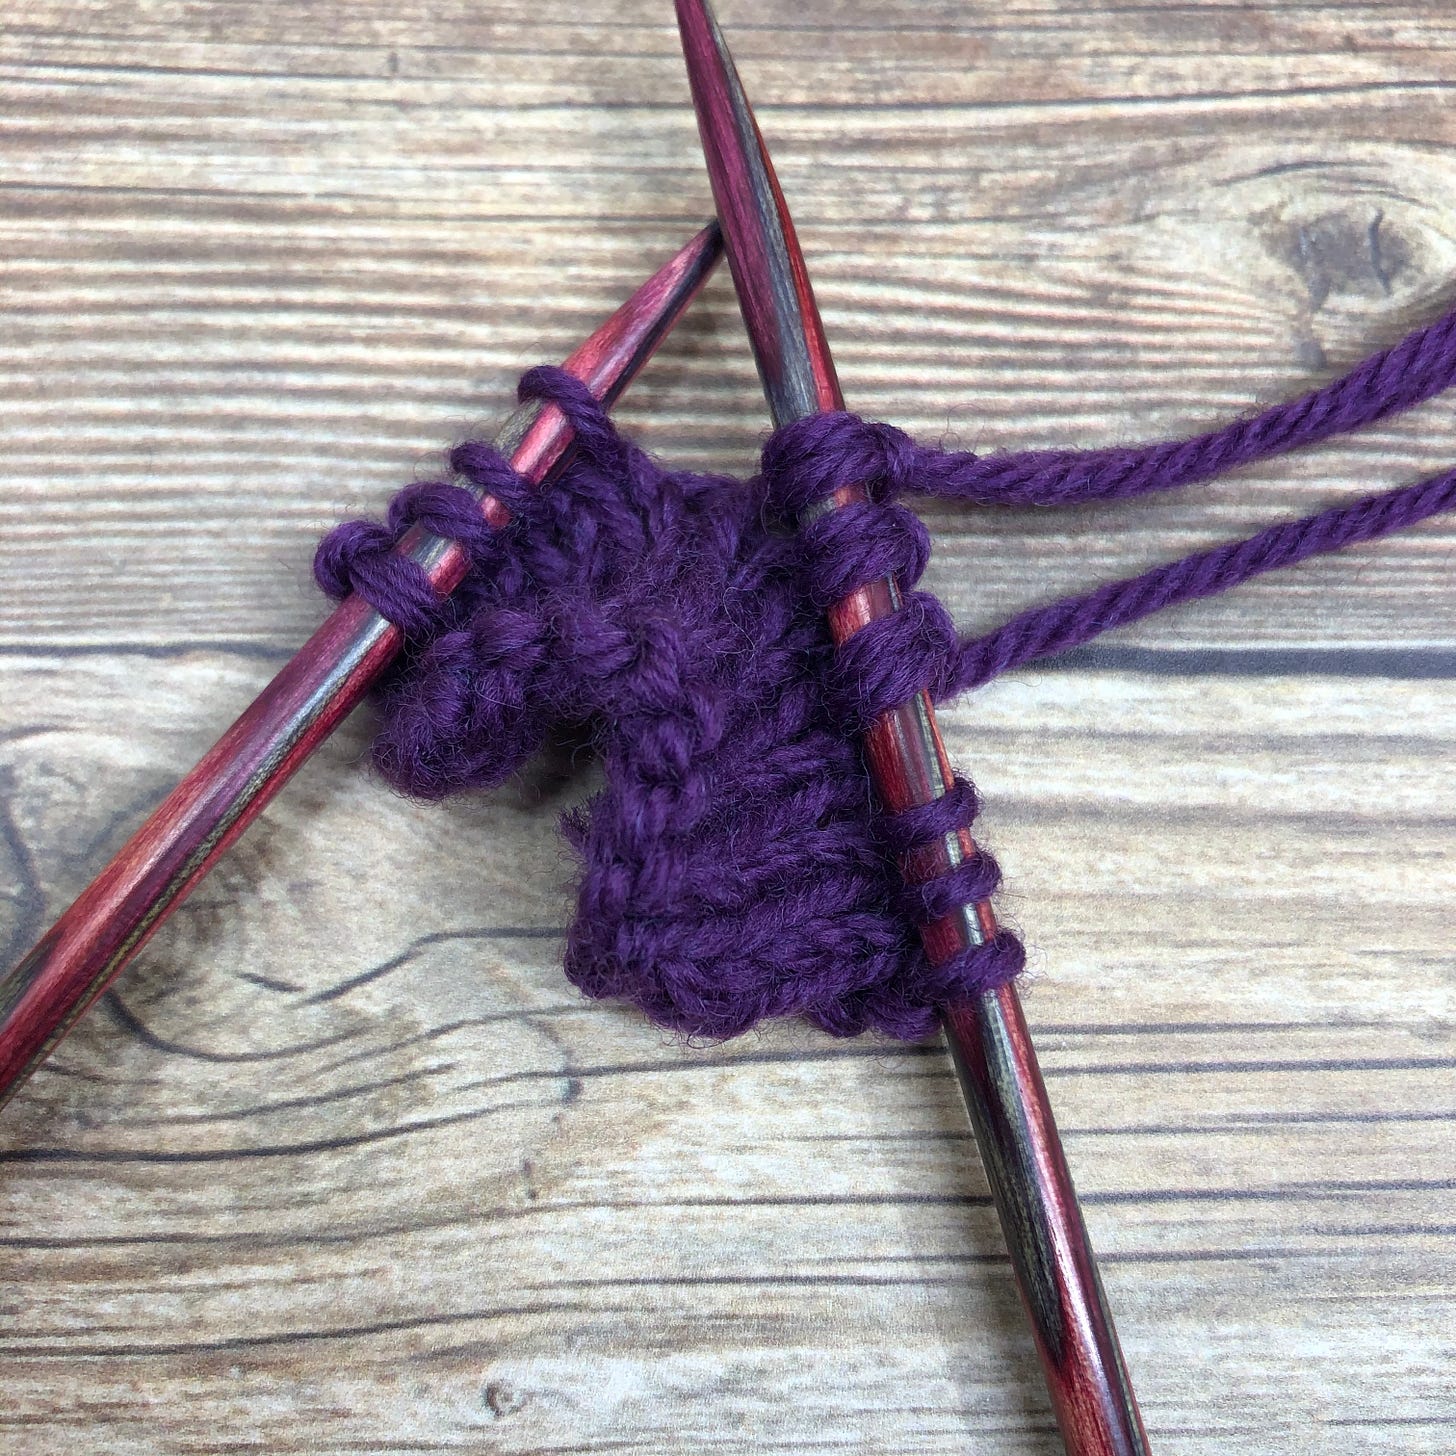 Three stitches with two strands of yarn